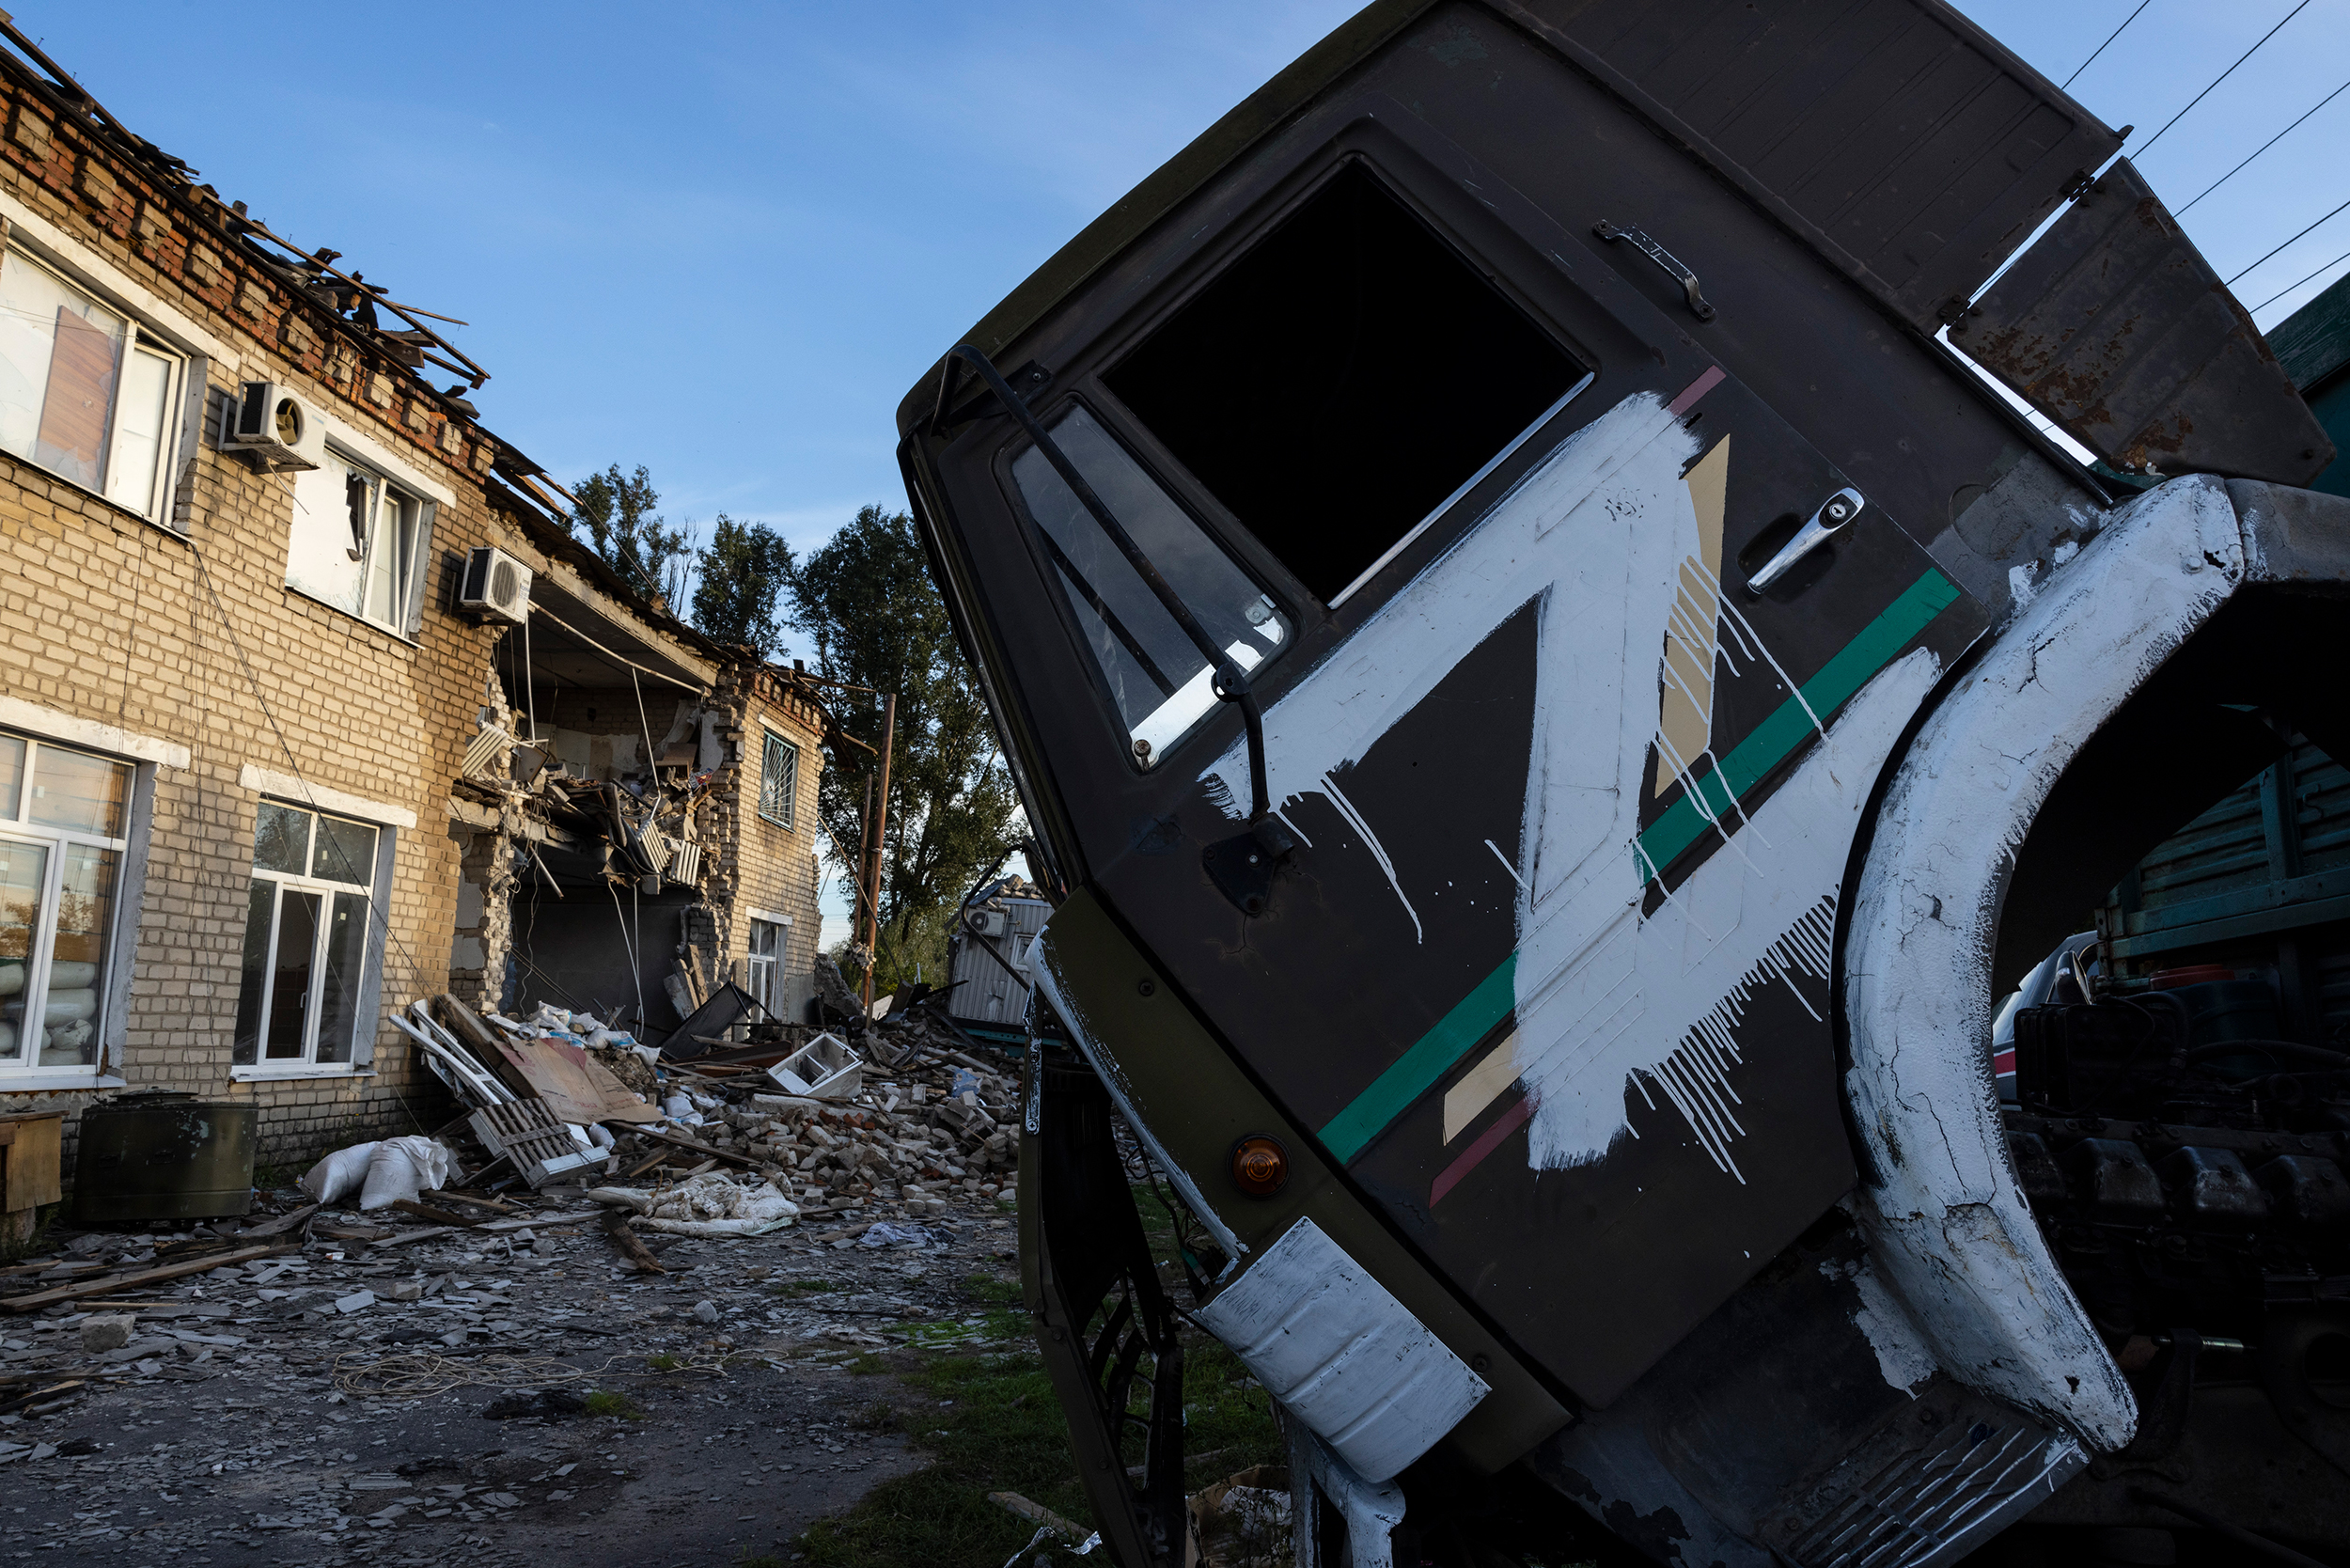 A destroyed Russian command center is seen on September 29, in Izium, Ukraine. On September 9th, Ukranian armed forces hit the center that was known as a jail and torture chamber. 